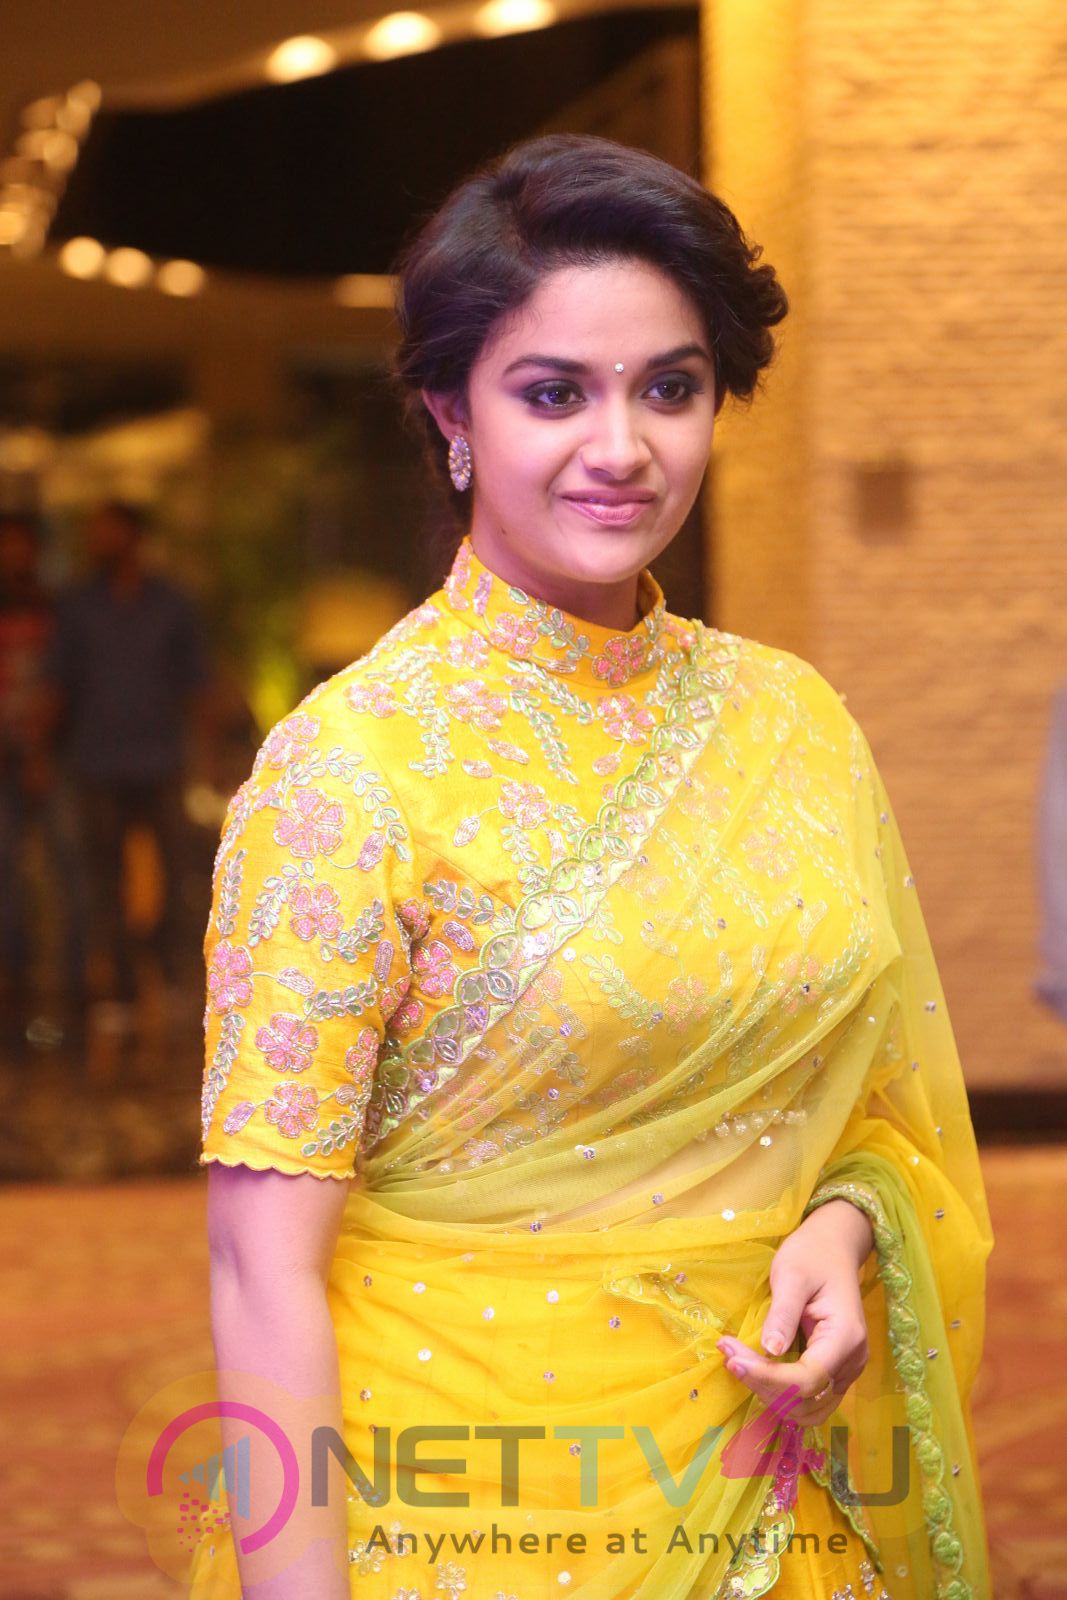 Keerthy Suresh Cute Lovely Stills At Remo Movie Audio Launch | 392279 |  Galleries & HD Images